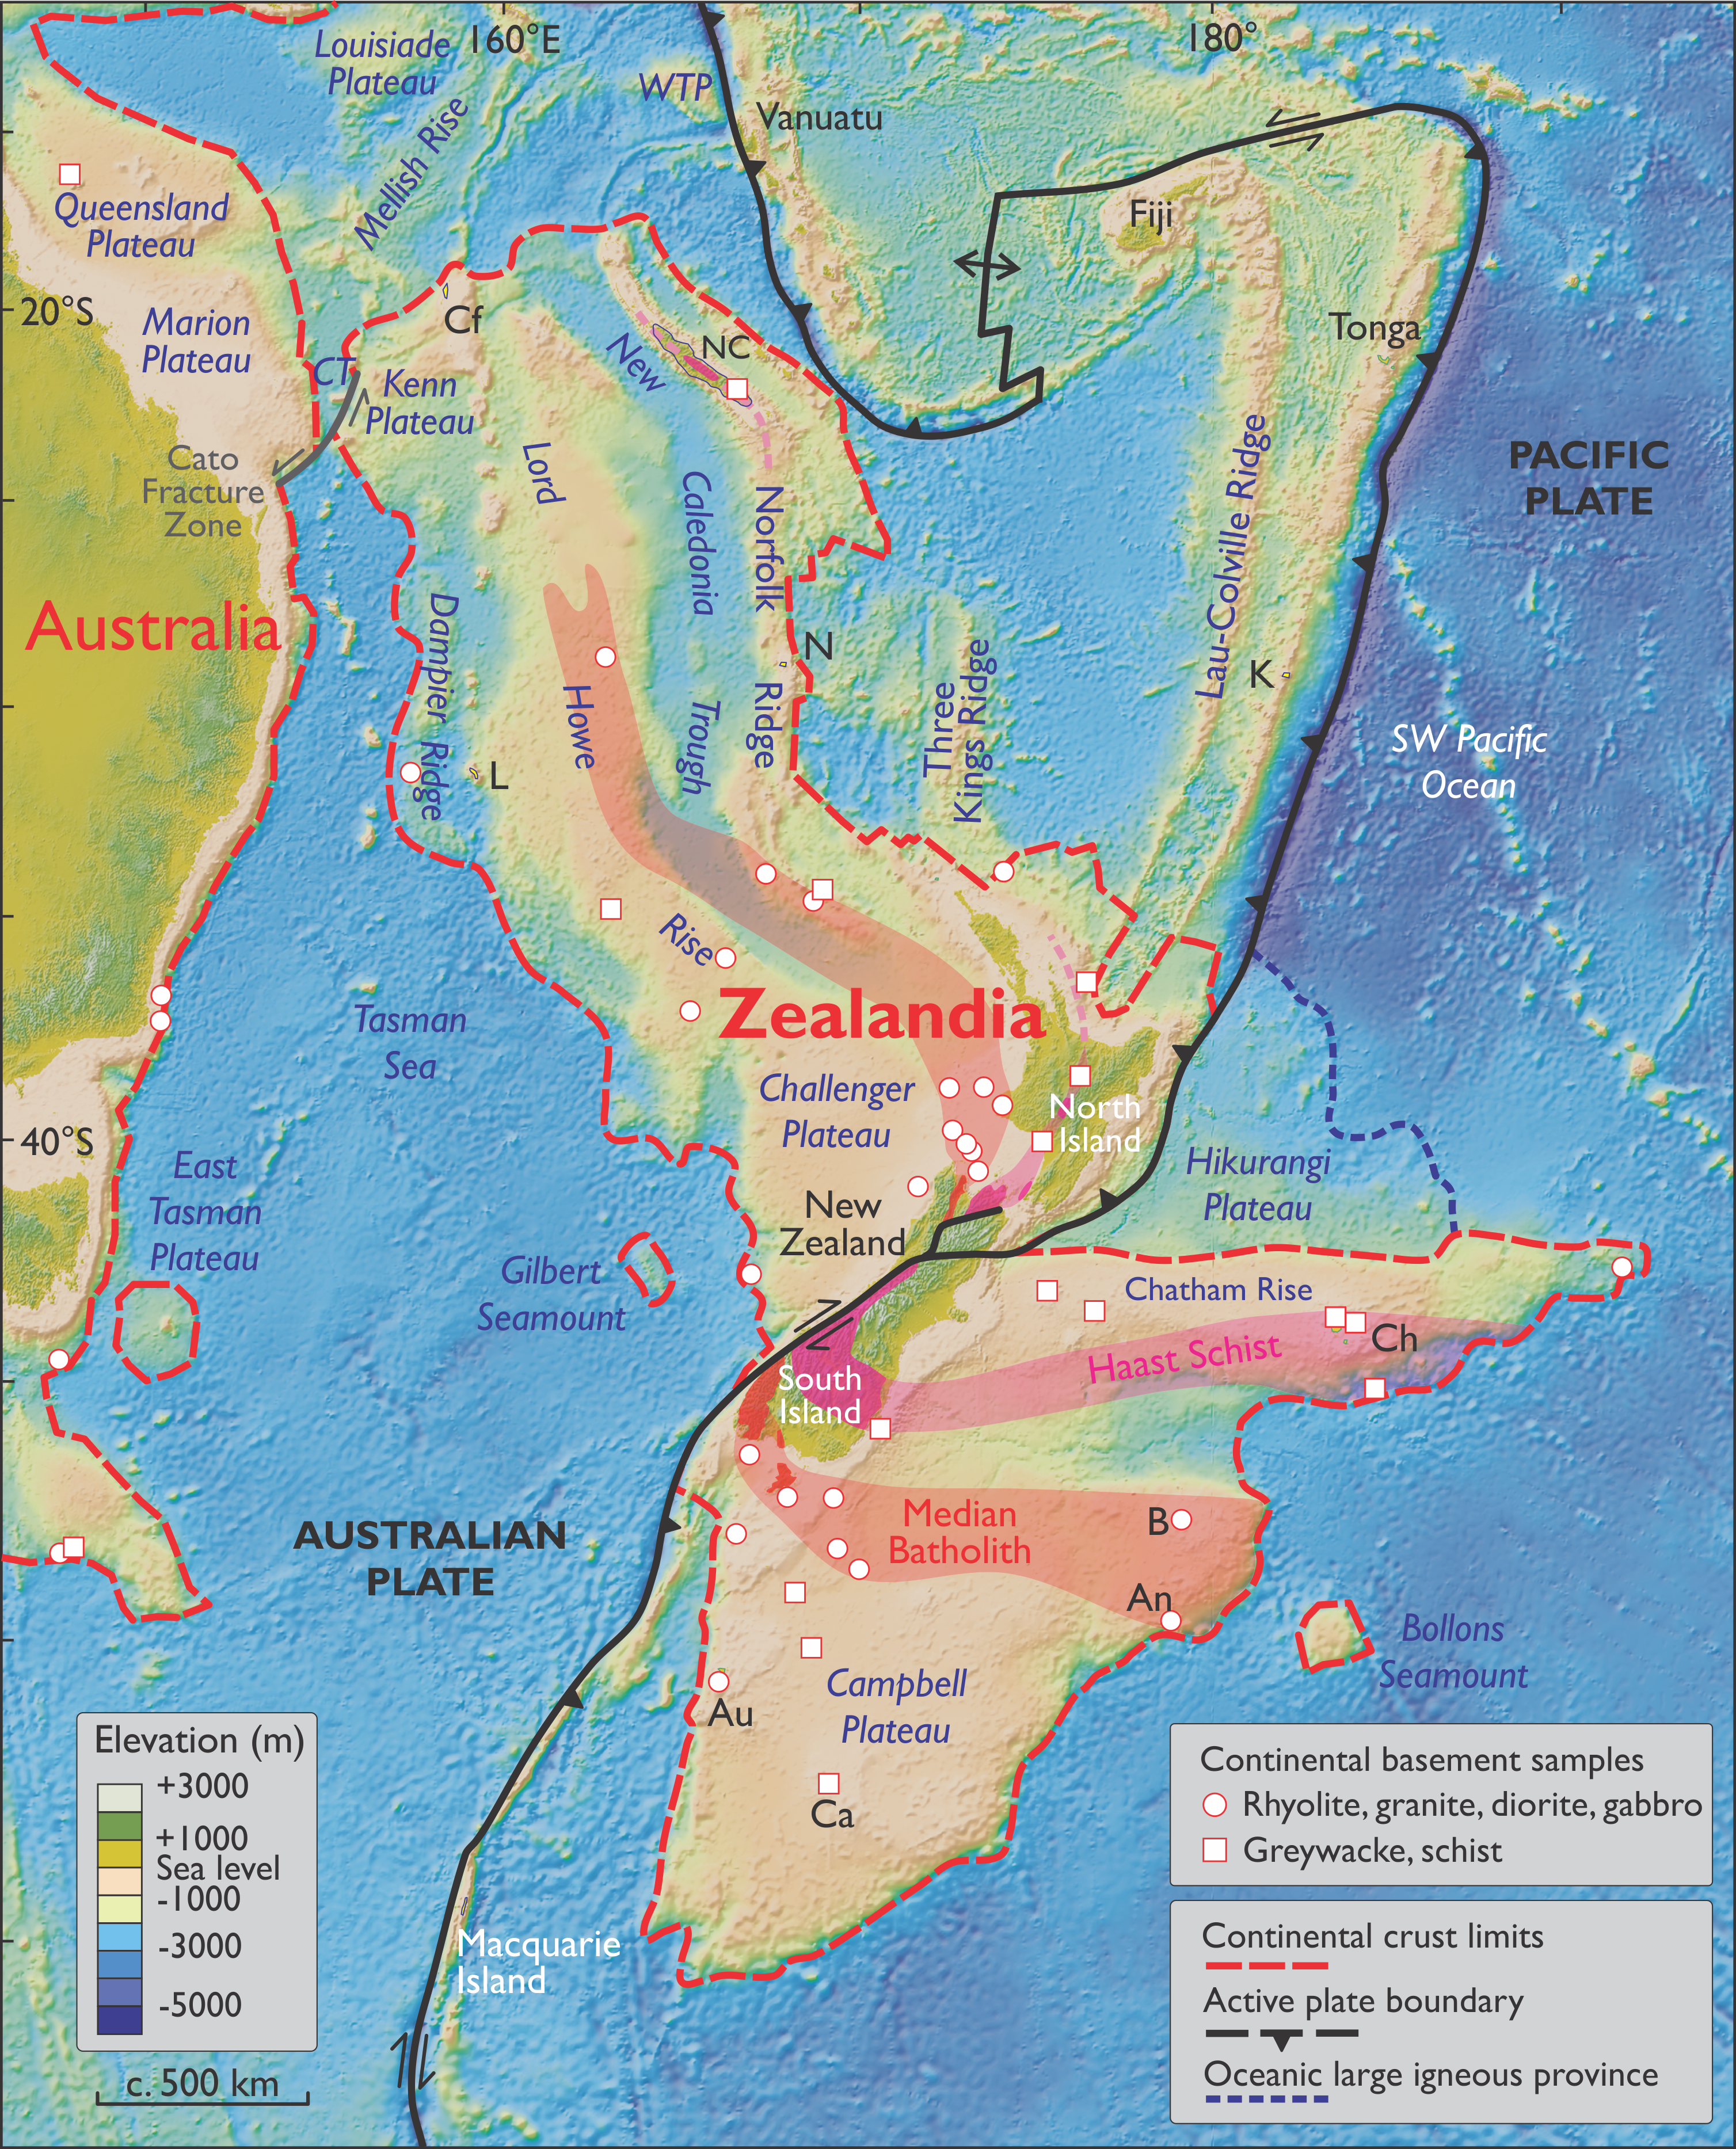 Researchers discover new underwater continent, 'Zealandia'